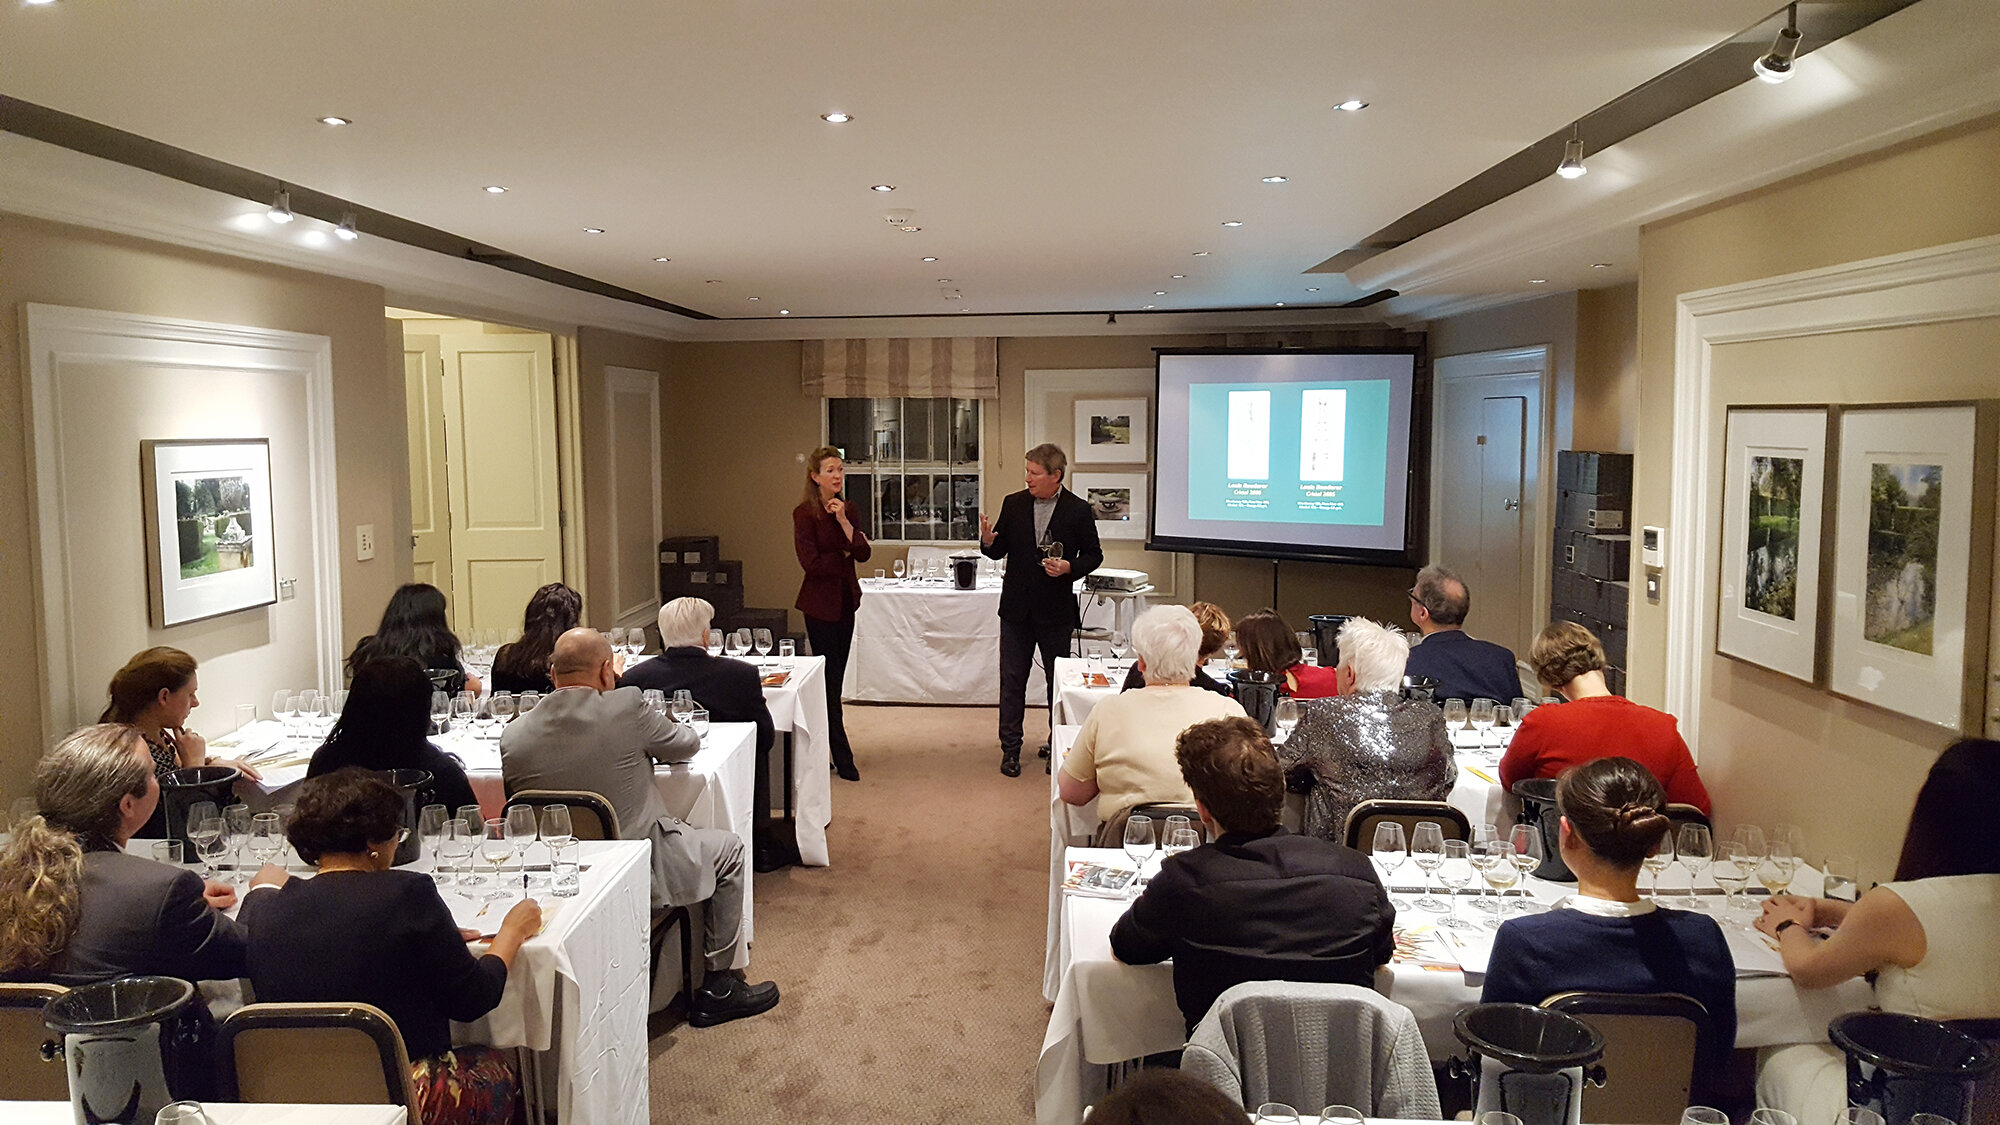  Joanna Simon and Anthony Rose in full action, giving the evening’s introductory remarks and an overview of the Champagne region’s terroir and profile 